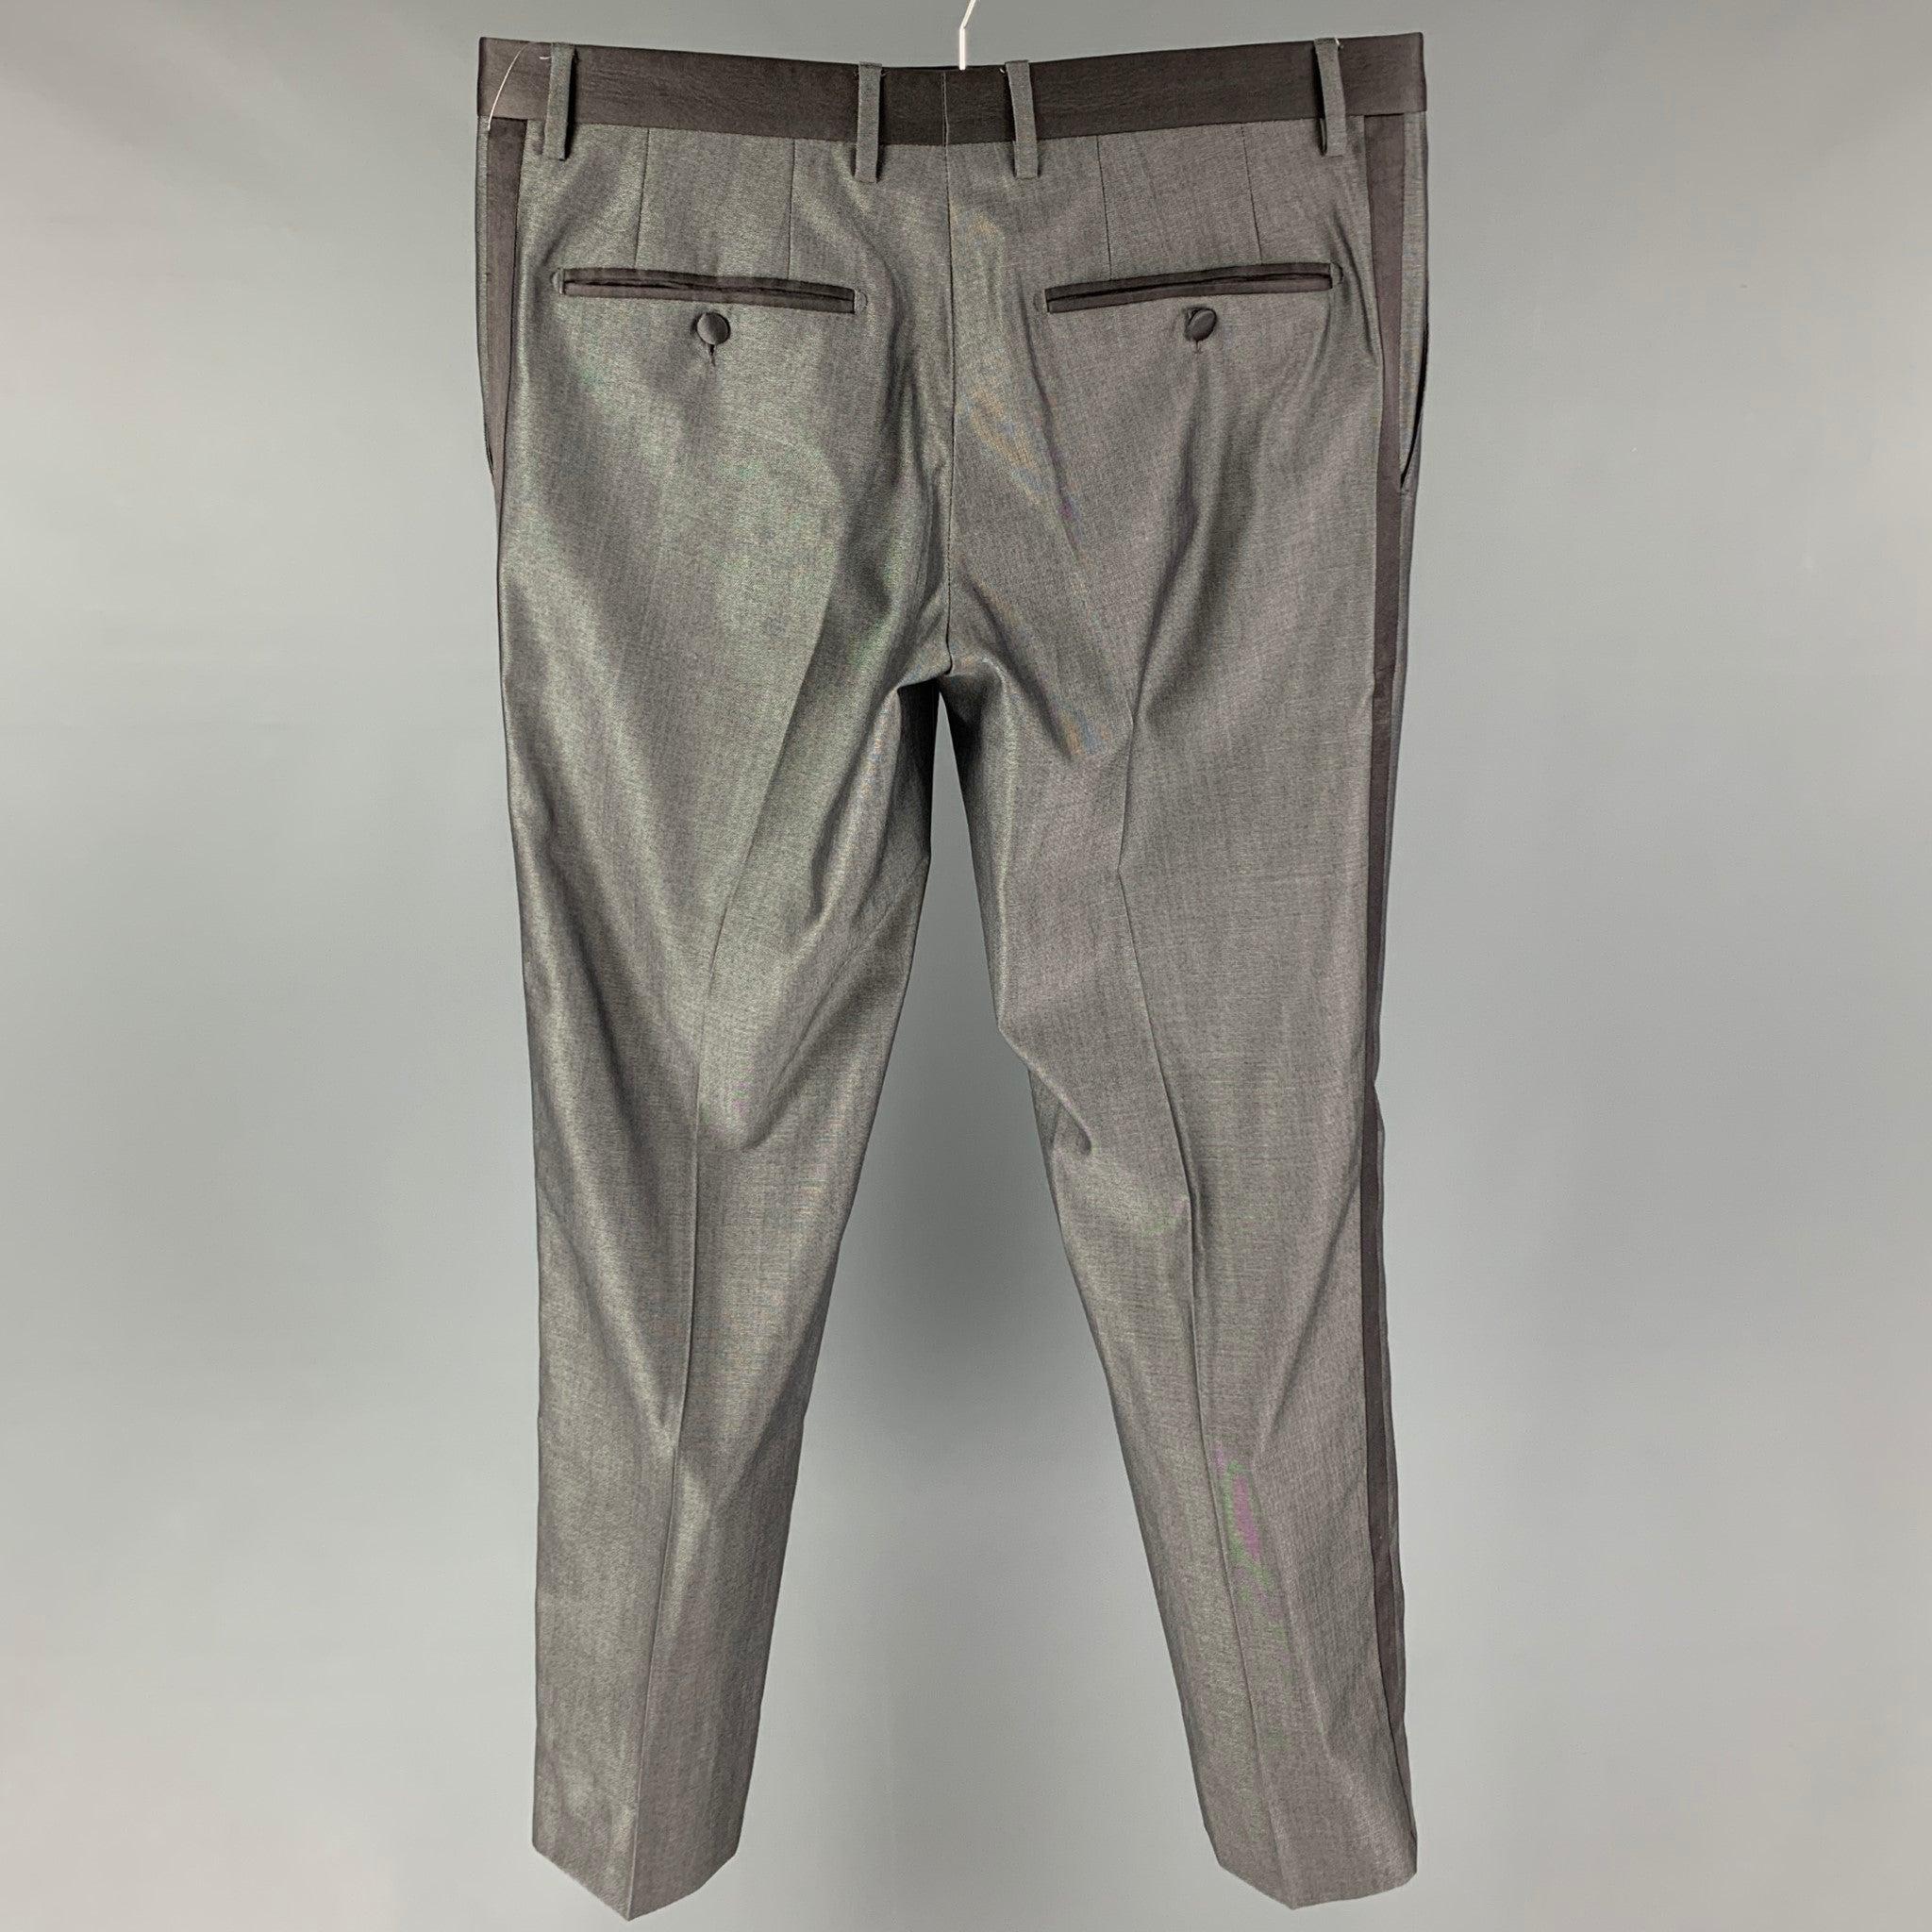 DOLCE & GABBANA dress pants comes in a grey wool / silk featuring a satin tim, slim fit, and a zip fly closure. Made in Italy.
Excellent
Pre-Owned Condition. 

Marked:   48 

Measurements: 
  Waist: 34 inches  Rise: 9 inches  Inseam: 31 inches 
  
 